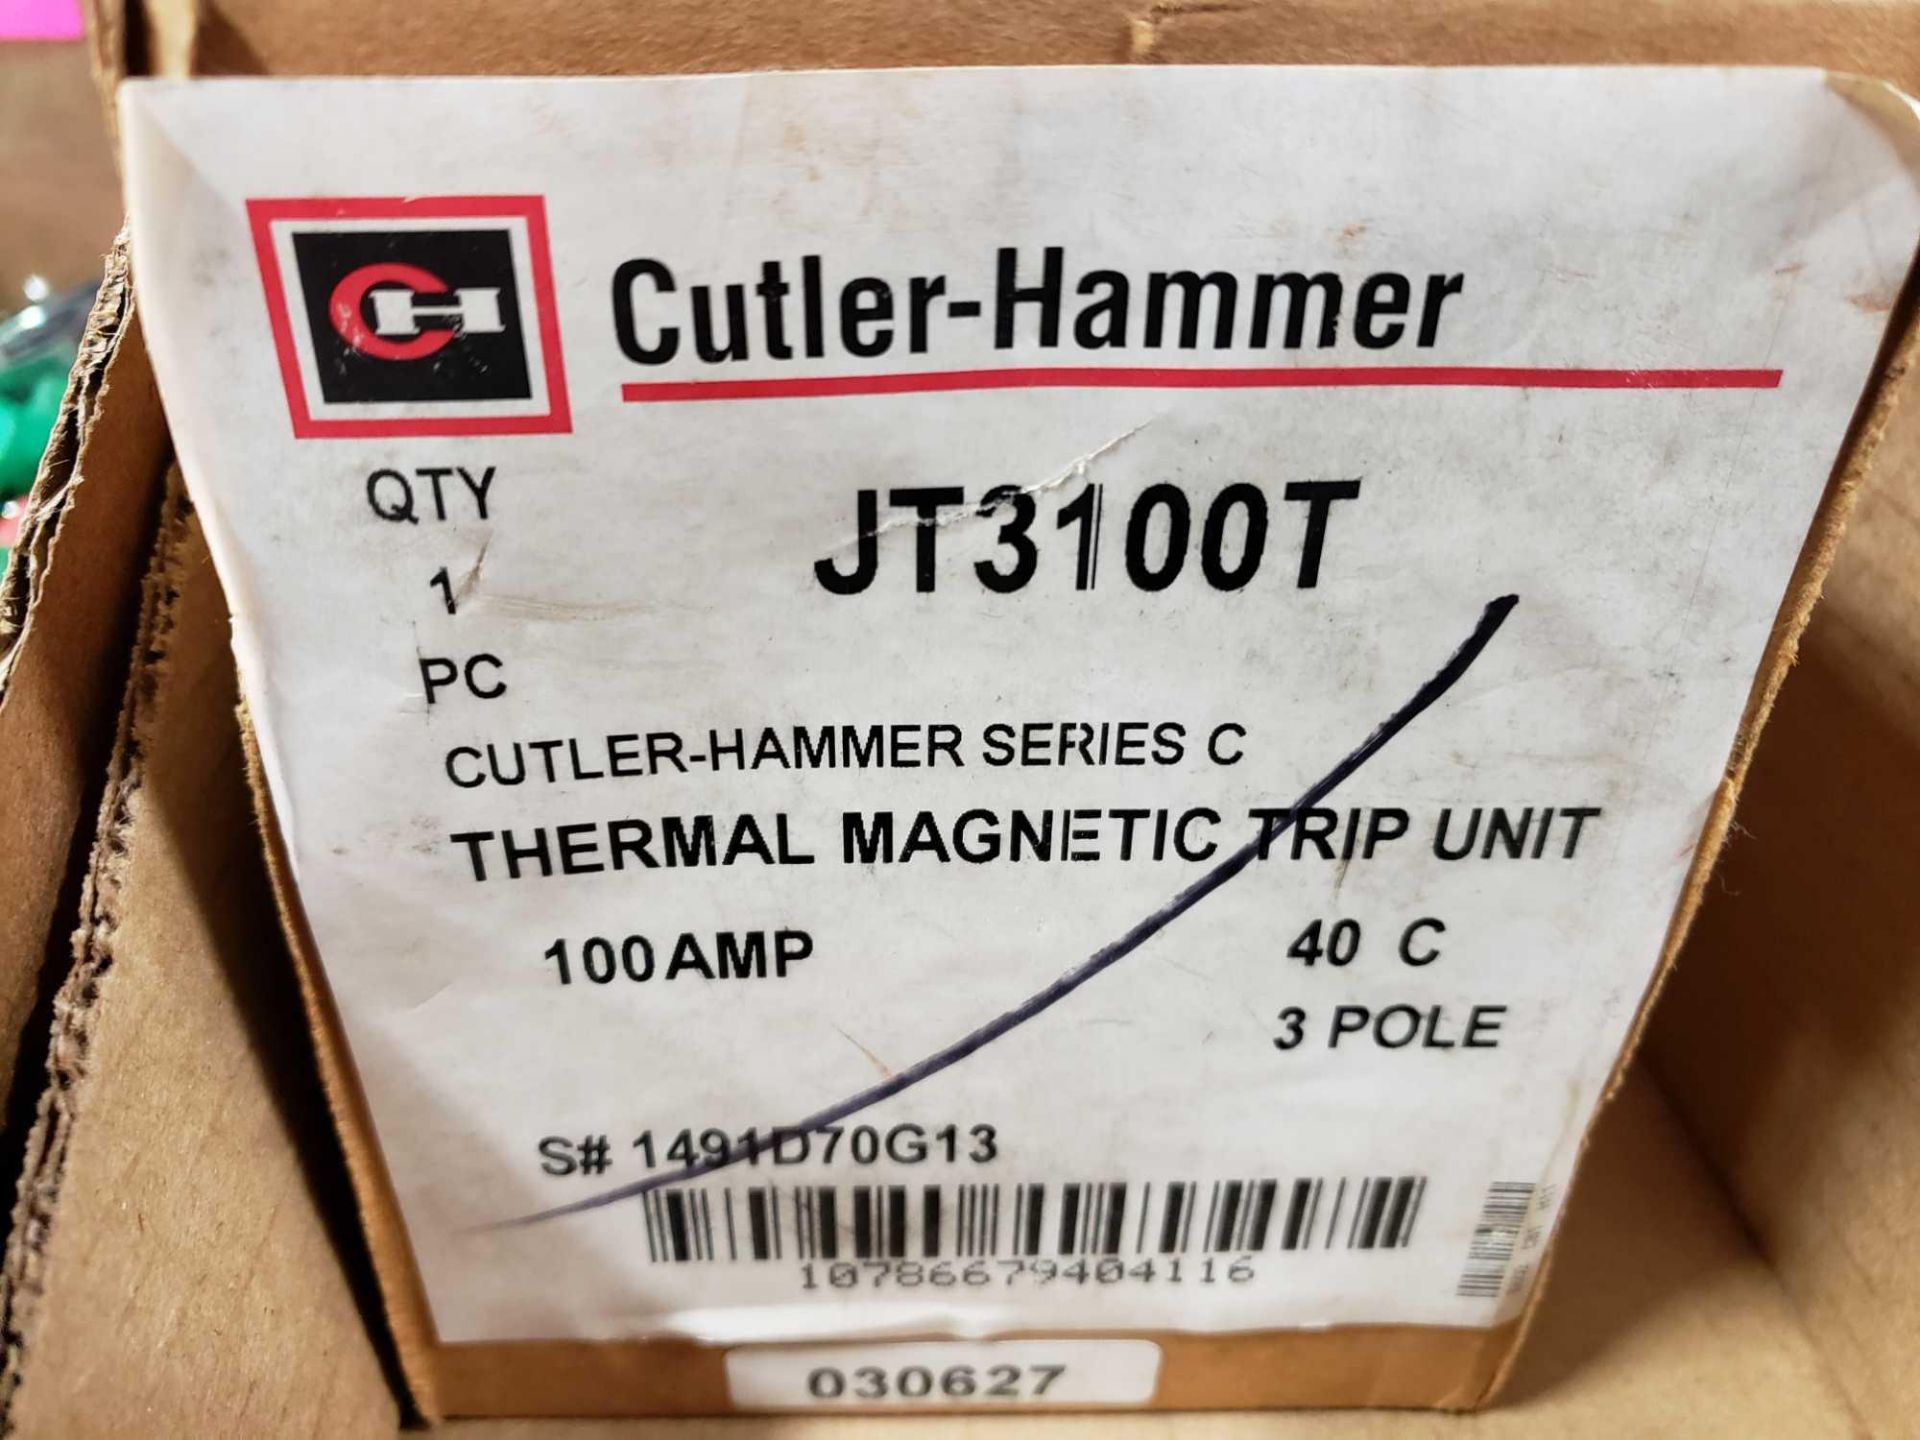 Cutler Hammer thermal magnetic trip unit model JT3100T. New in box. - Image 2 of 2